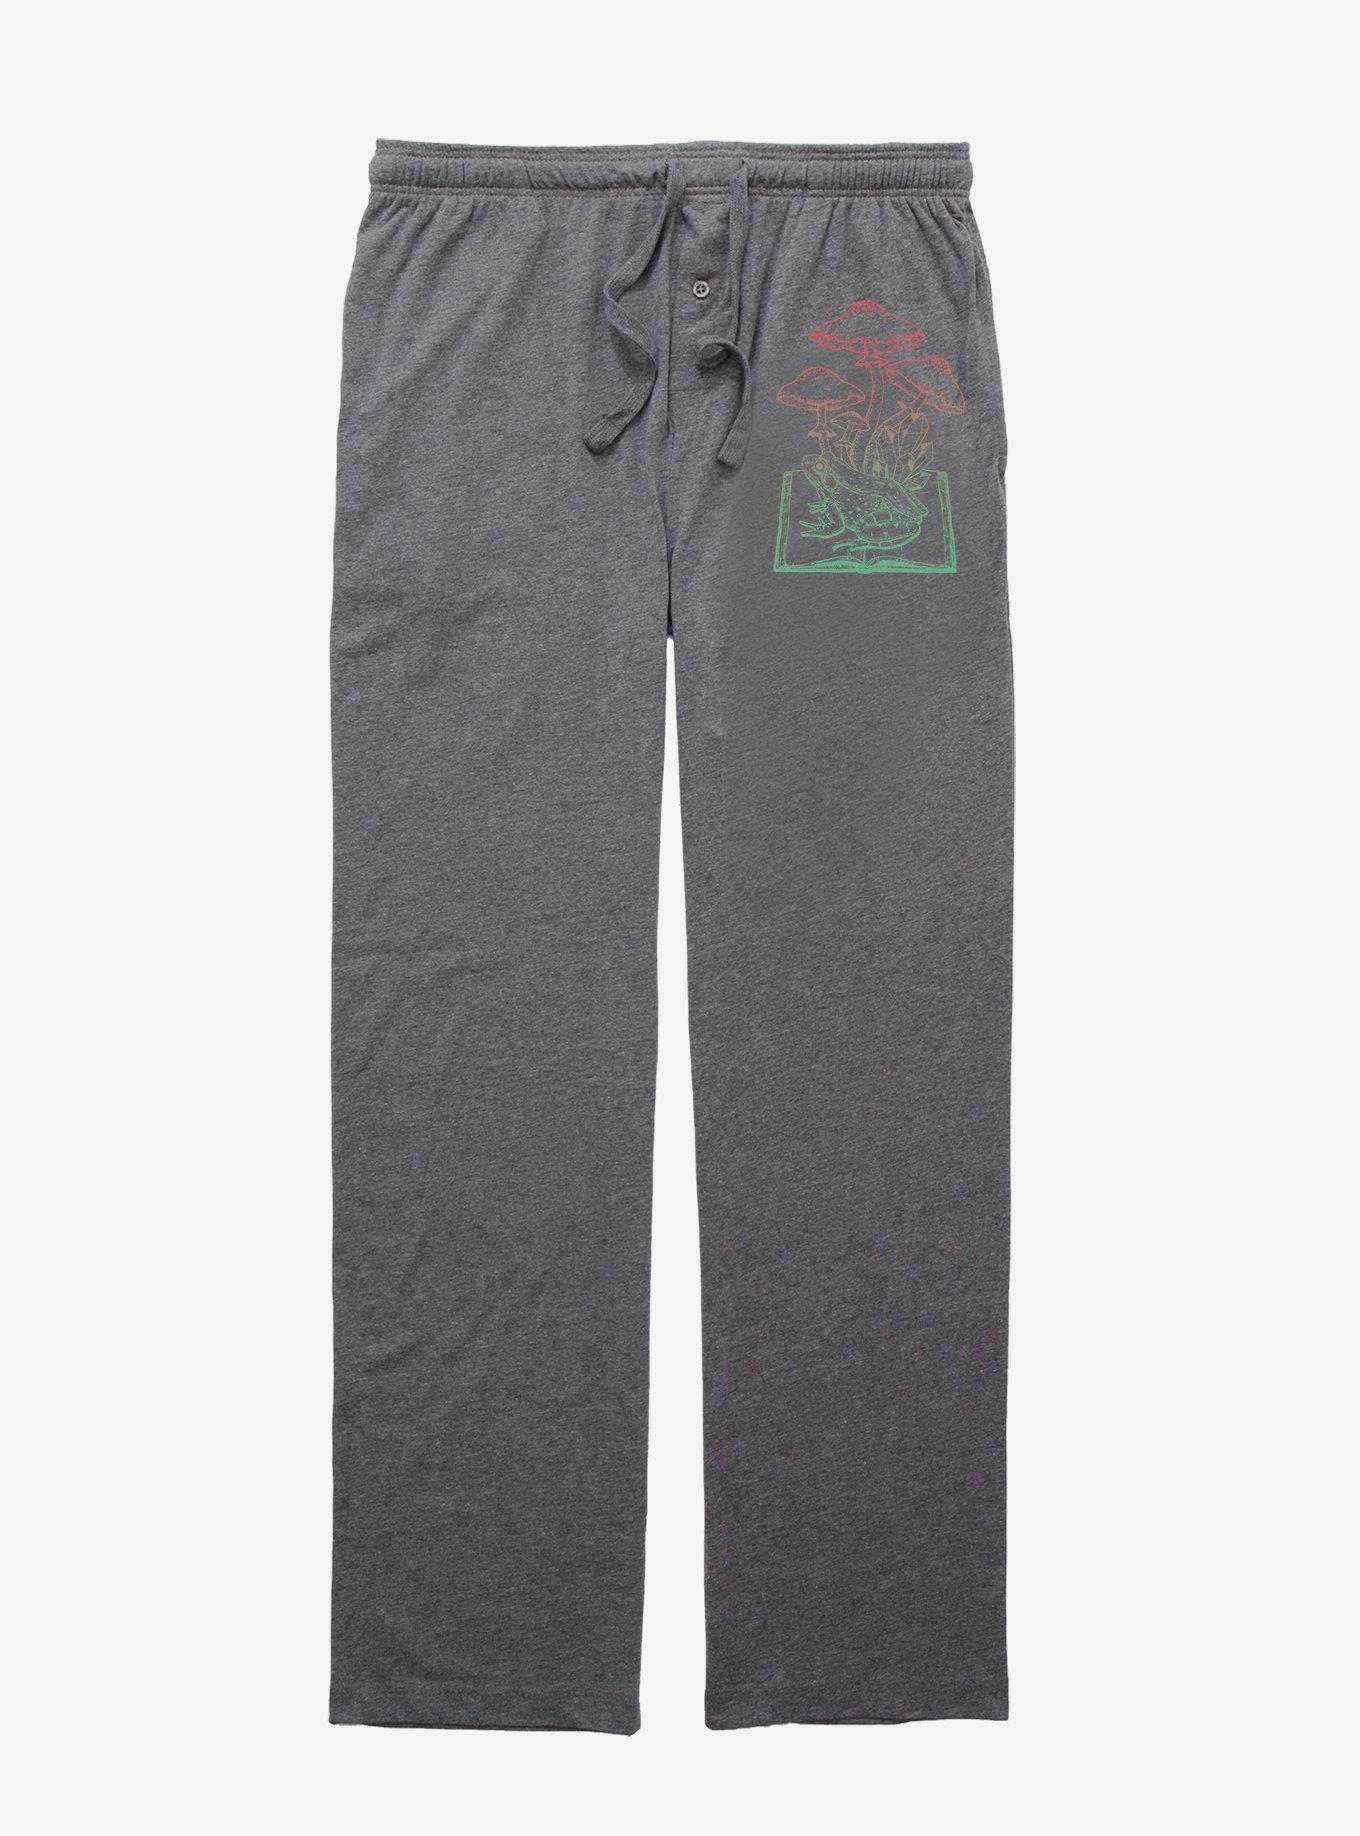 Trippin Out Of A Book Pajama Pants, GRAPHITE HEATHER, hi-res